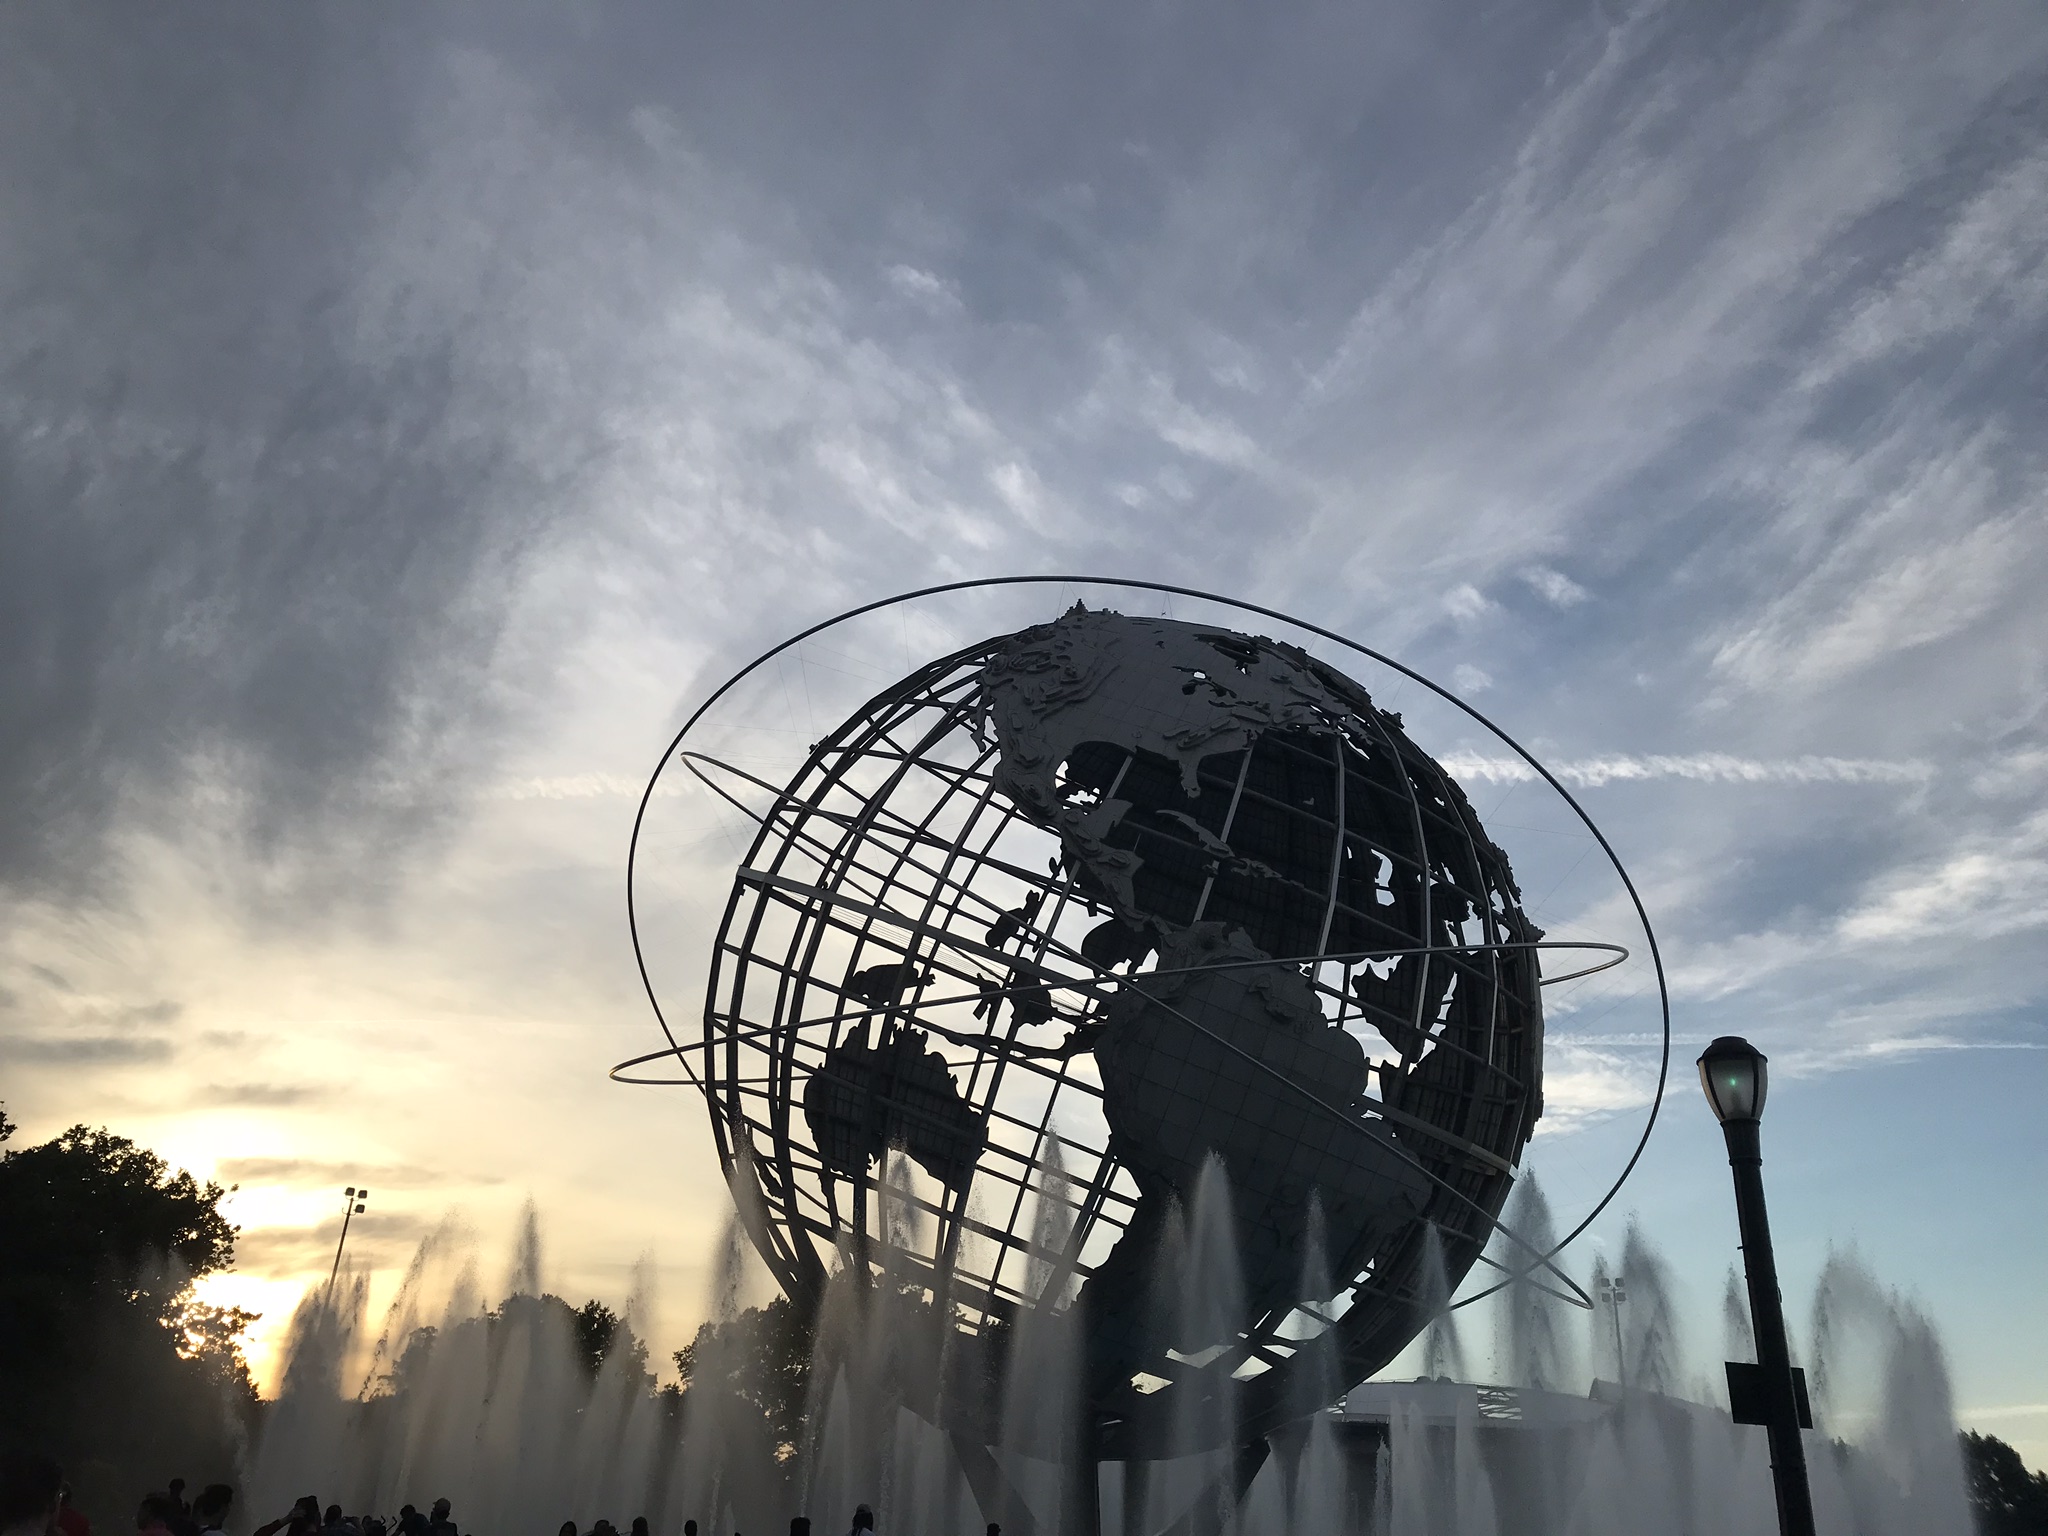 Image of the Queensborough Flushing Meadow Park Globe